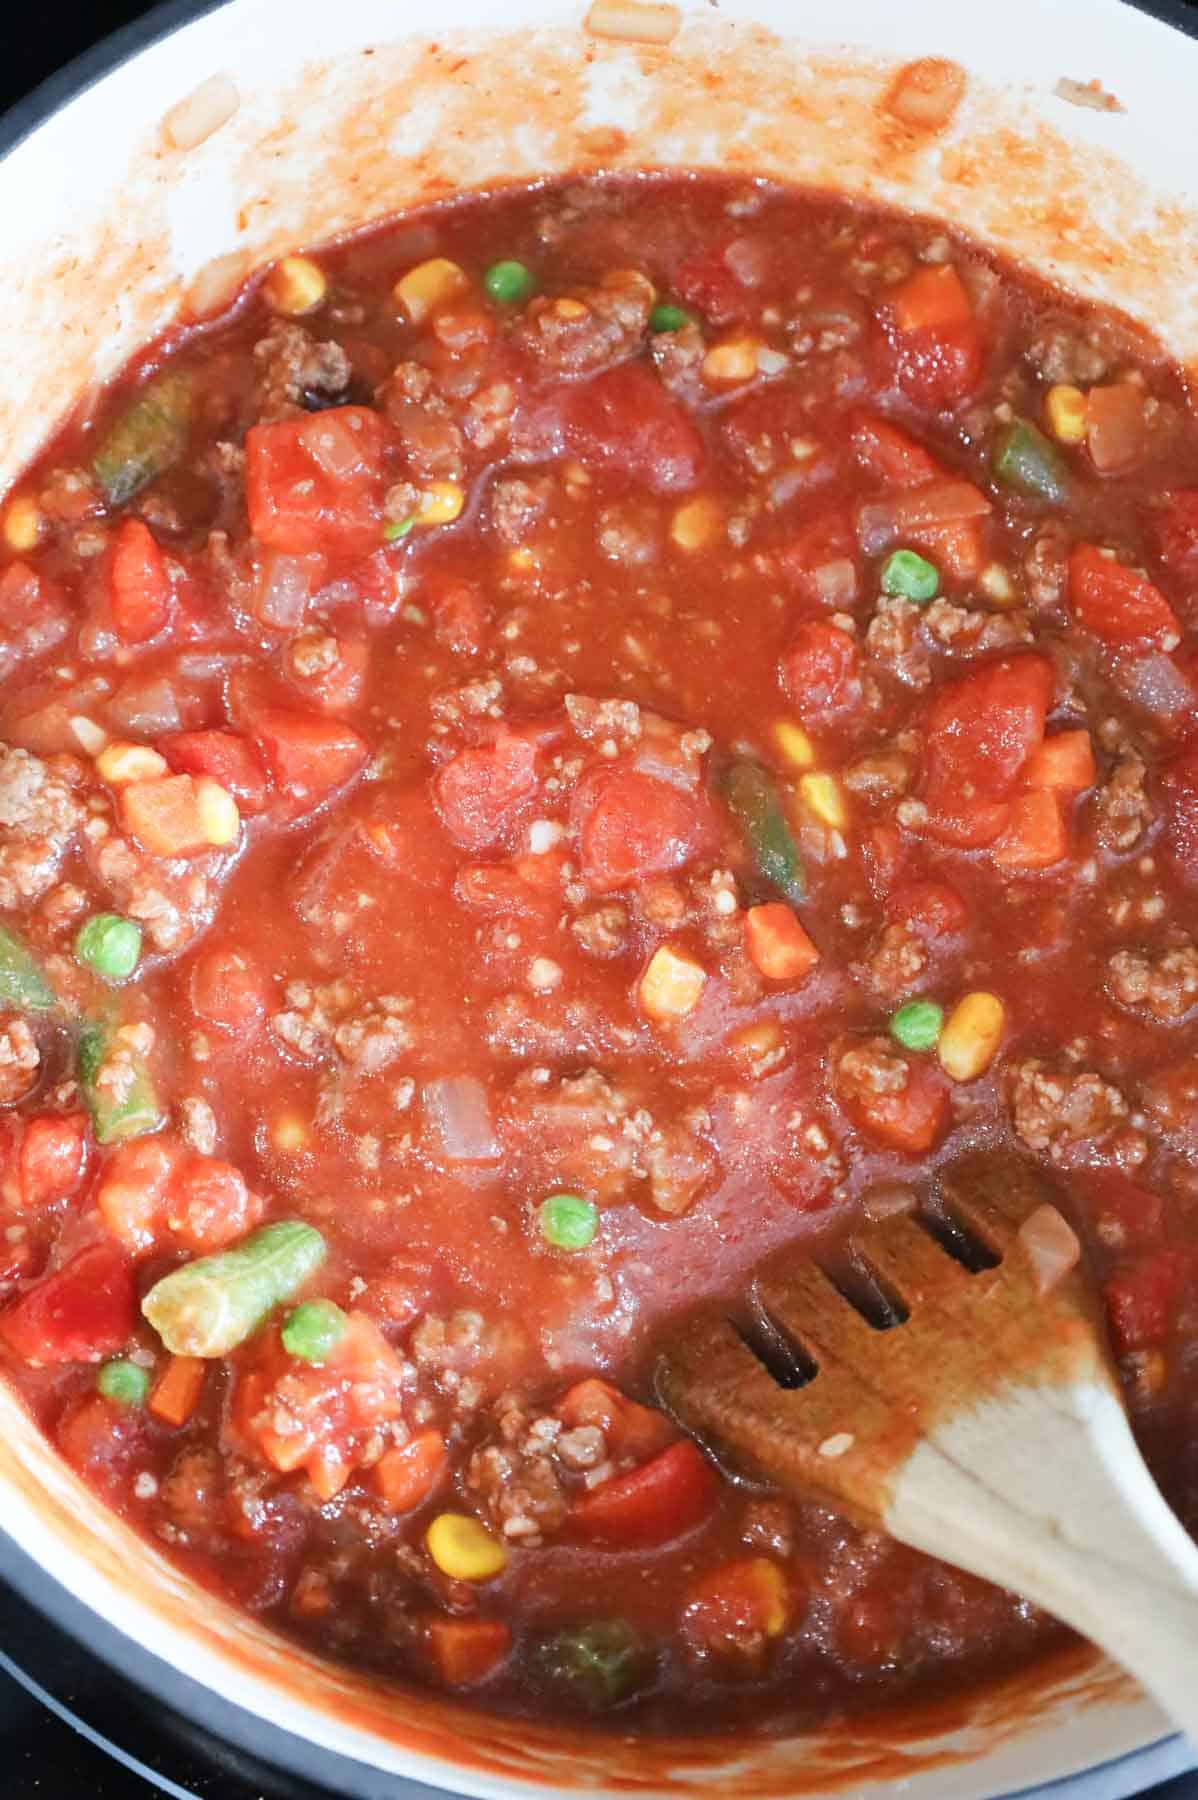 diced tomatoes, tomato sauce, mixed veggies and ground beef being stirred together in a pot